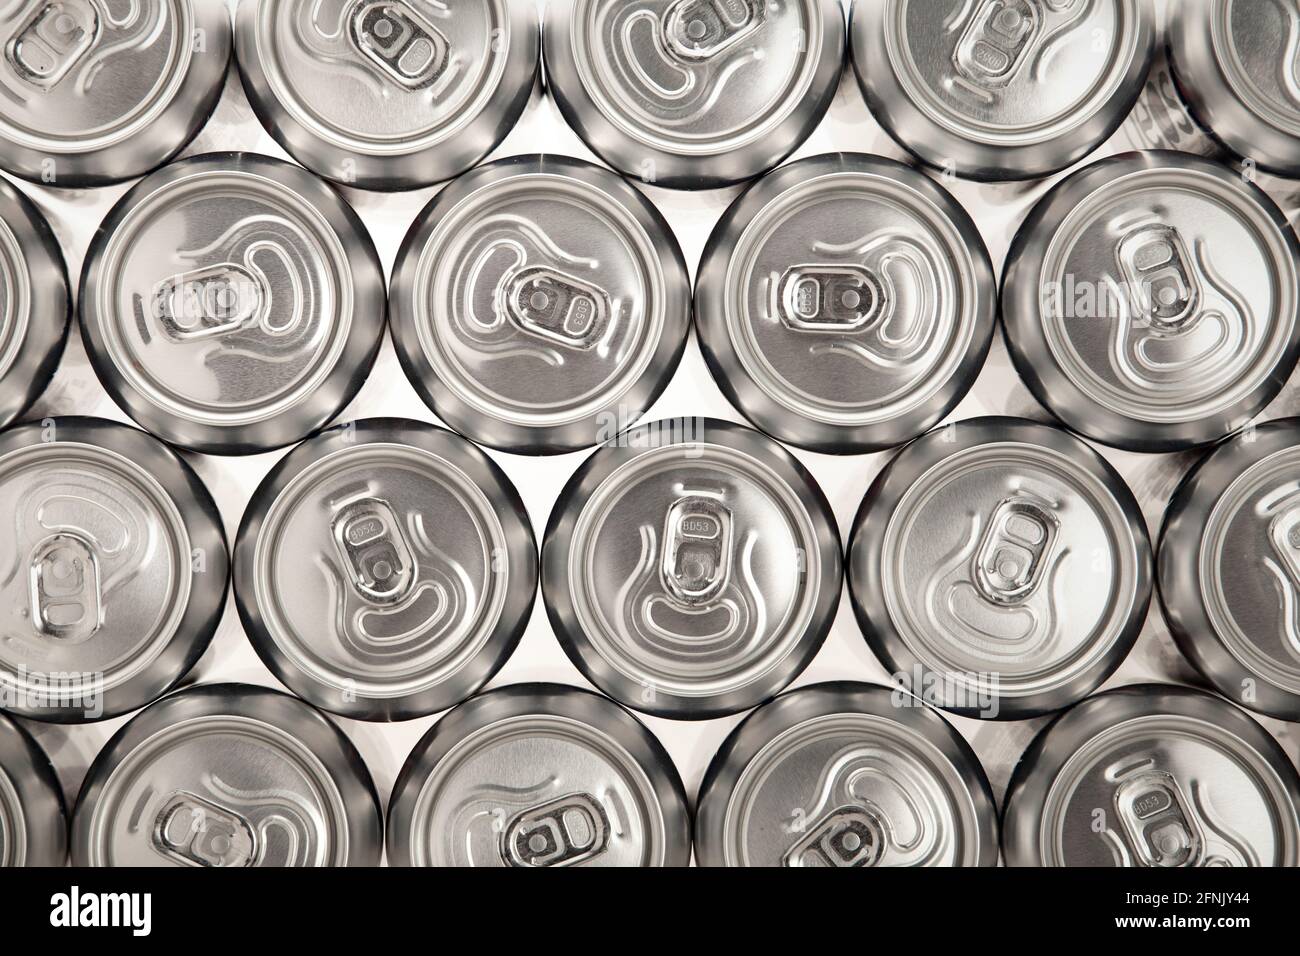 Number of aluminium cans viewed from above Stock Photo